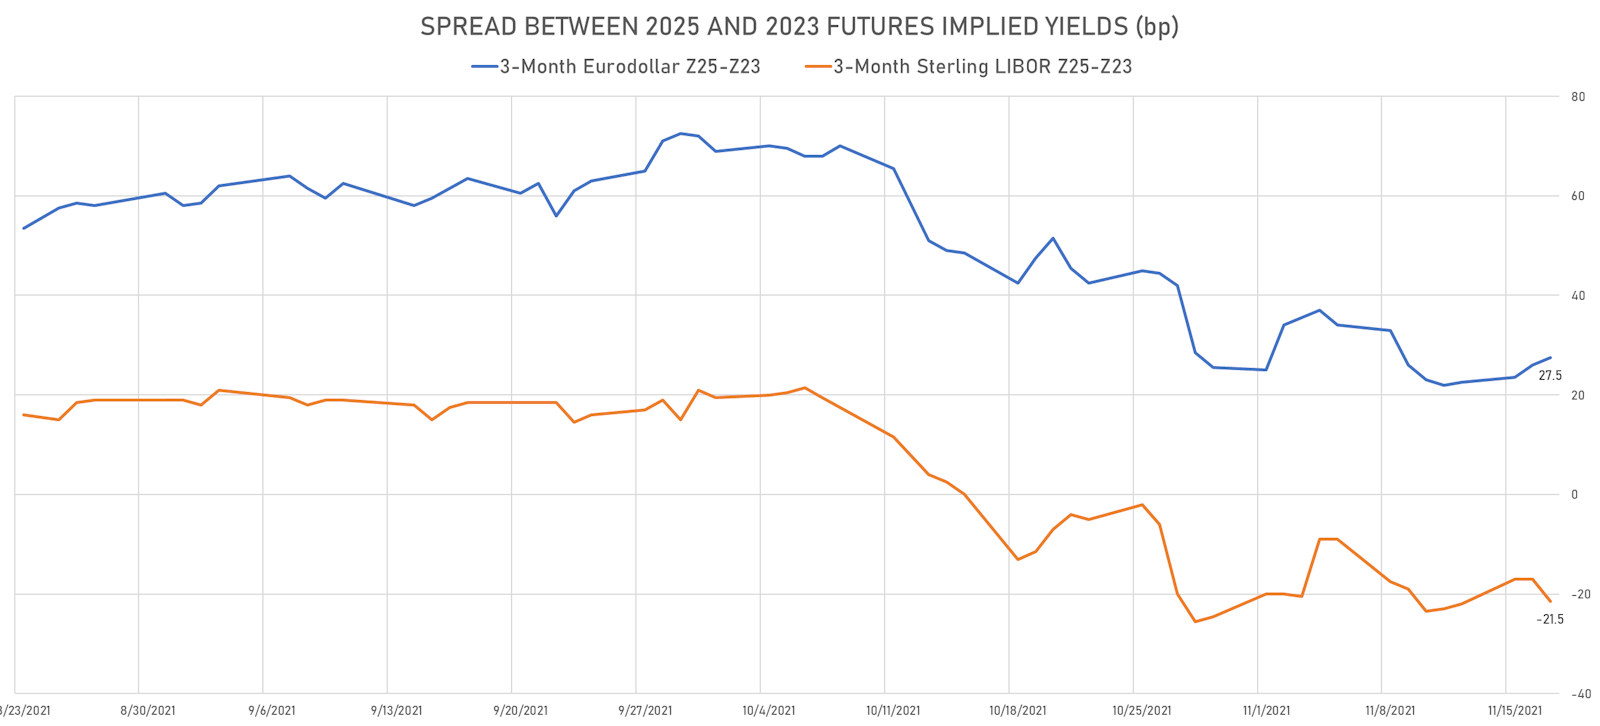 Spread In Implied Yields Between 2025 And 2023 3-Month Interest Rates Futures | Sources: ϕpost, Refinitiv data